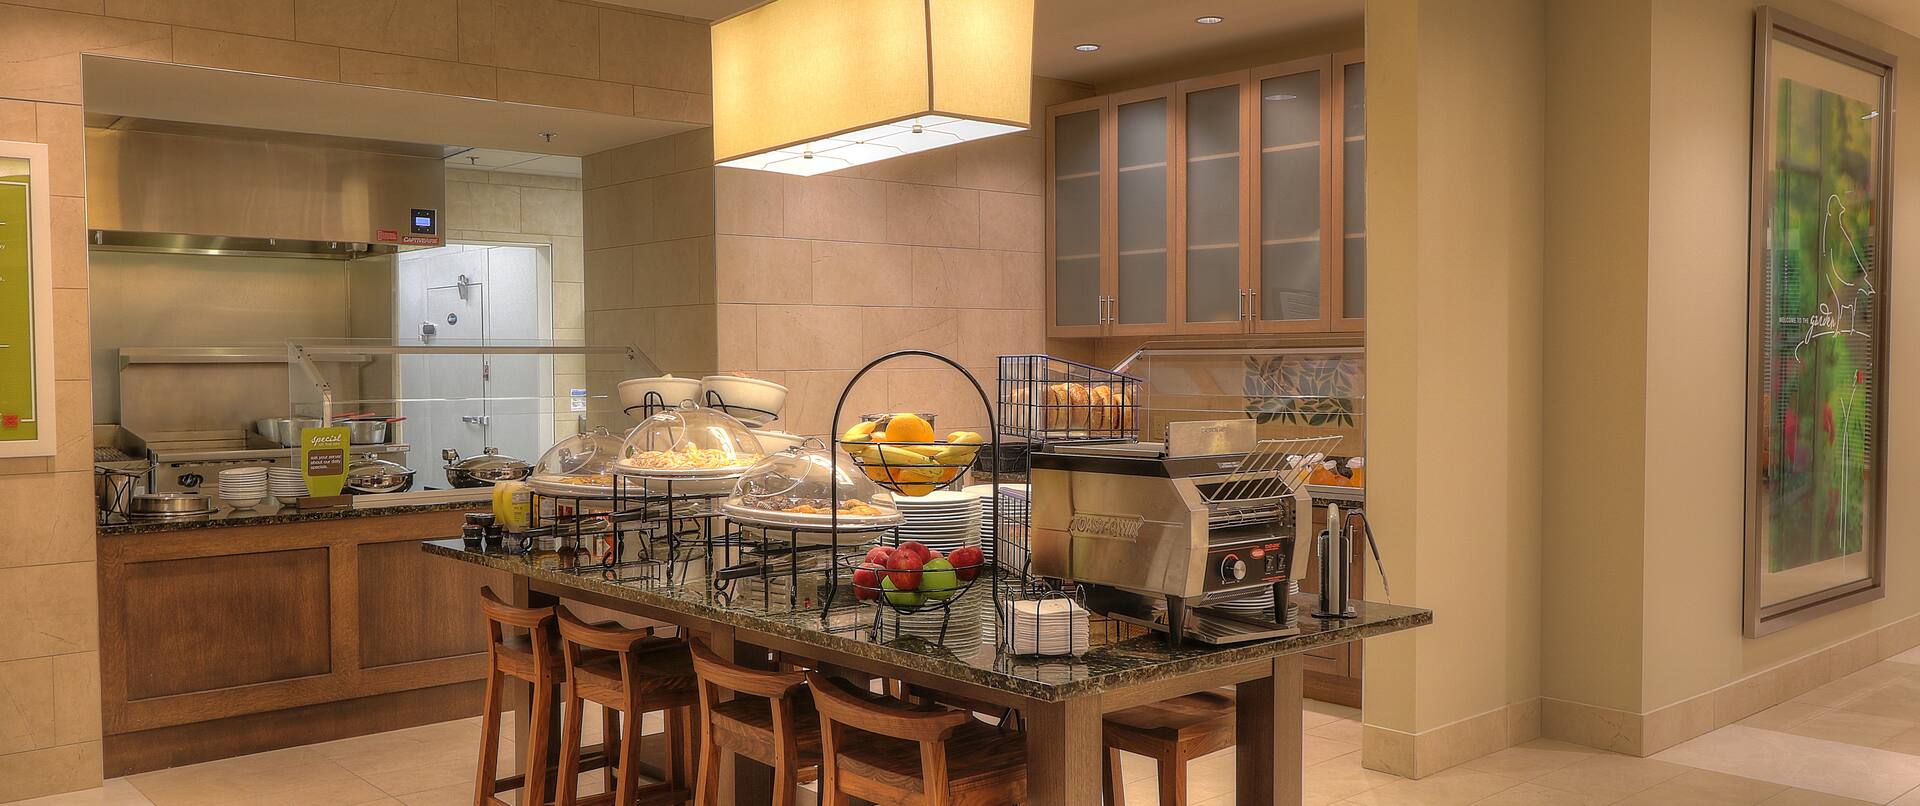 Wide view of Breakfast Service Area With Plates, Utensils, Hot and Cold Buffet Items